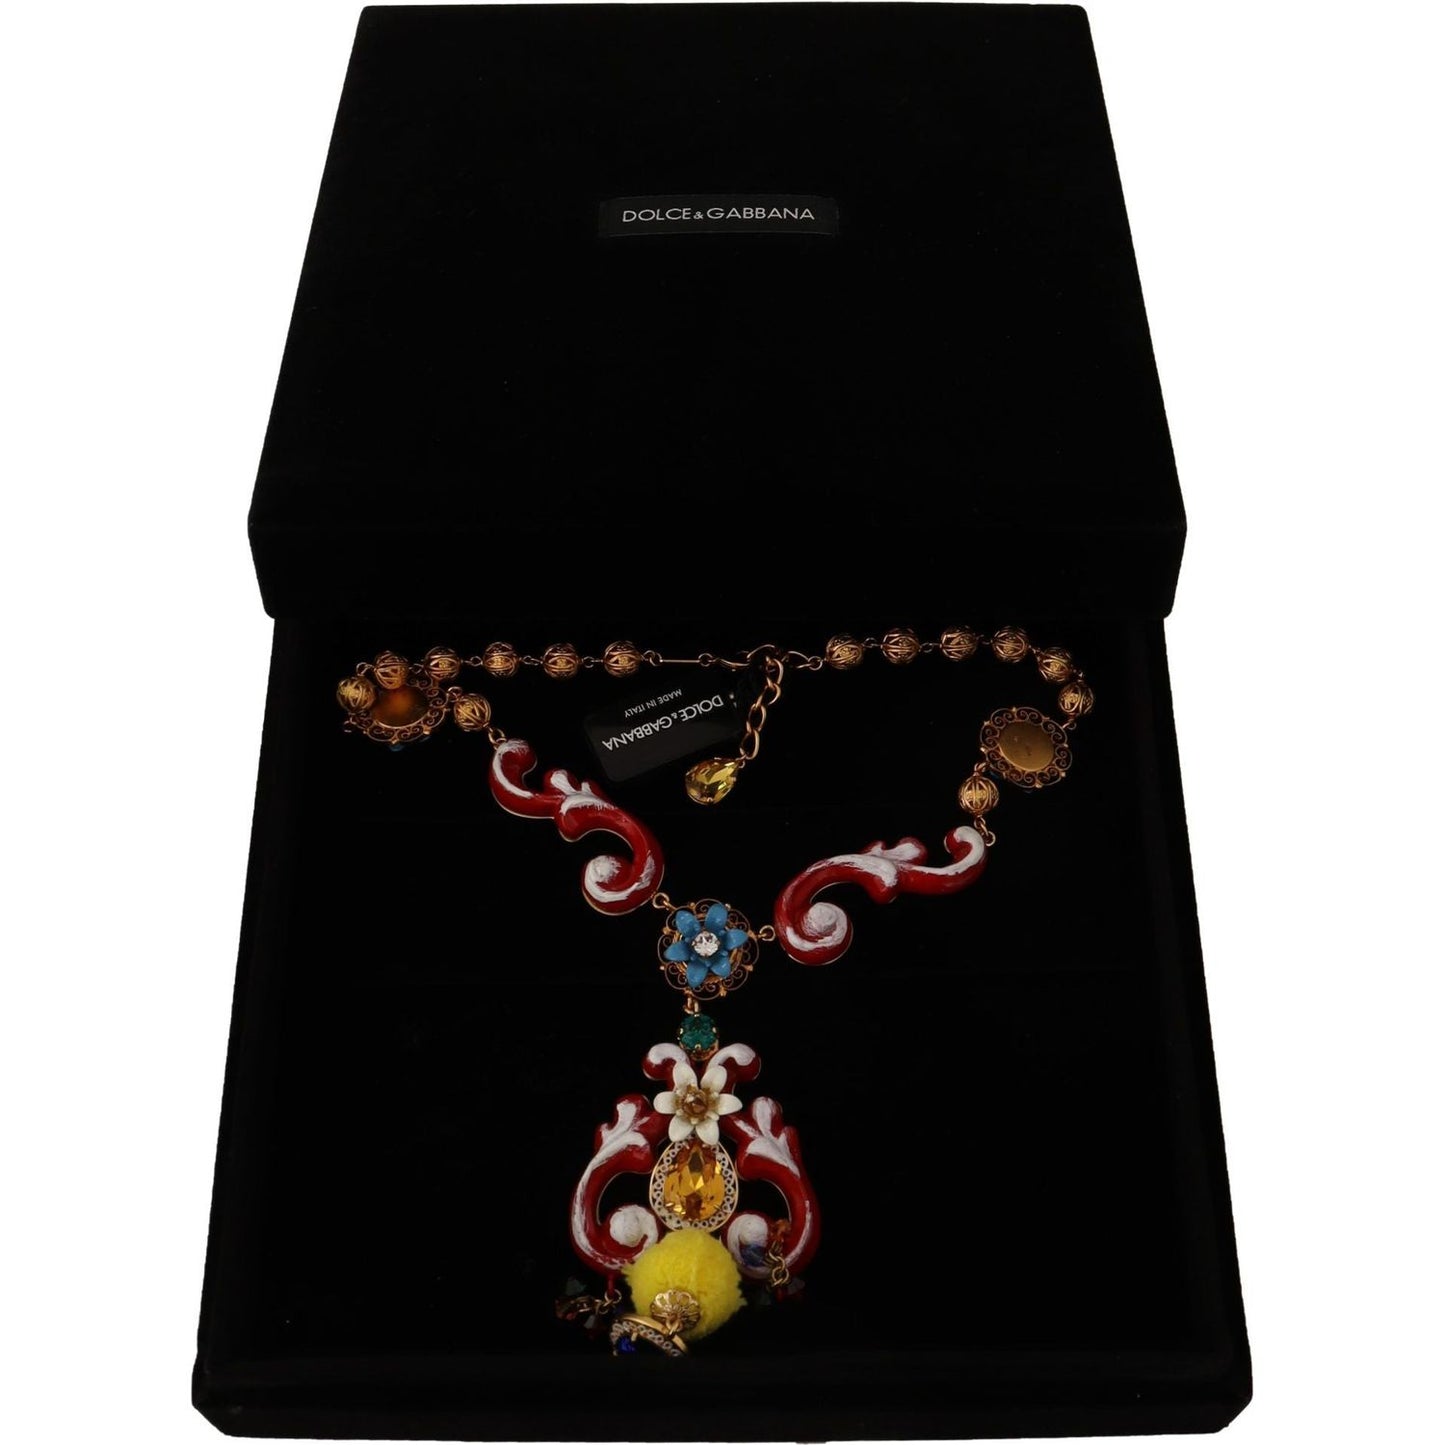 Dolce & Gabbana Multicolor Crystal Statement Necklace WOMAN NECKLACE gold-brass-carretto-sicily-statement-crystal-chain-necklace